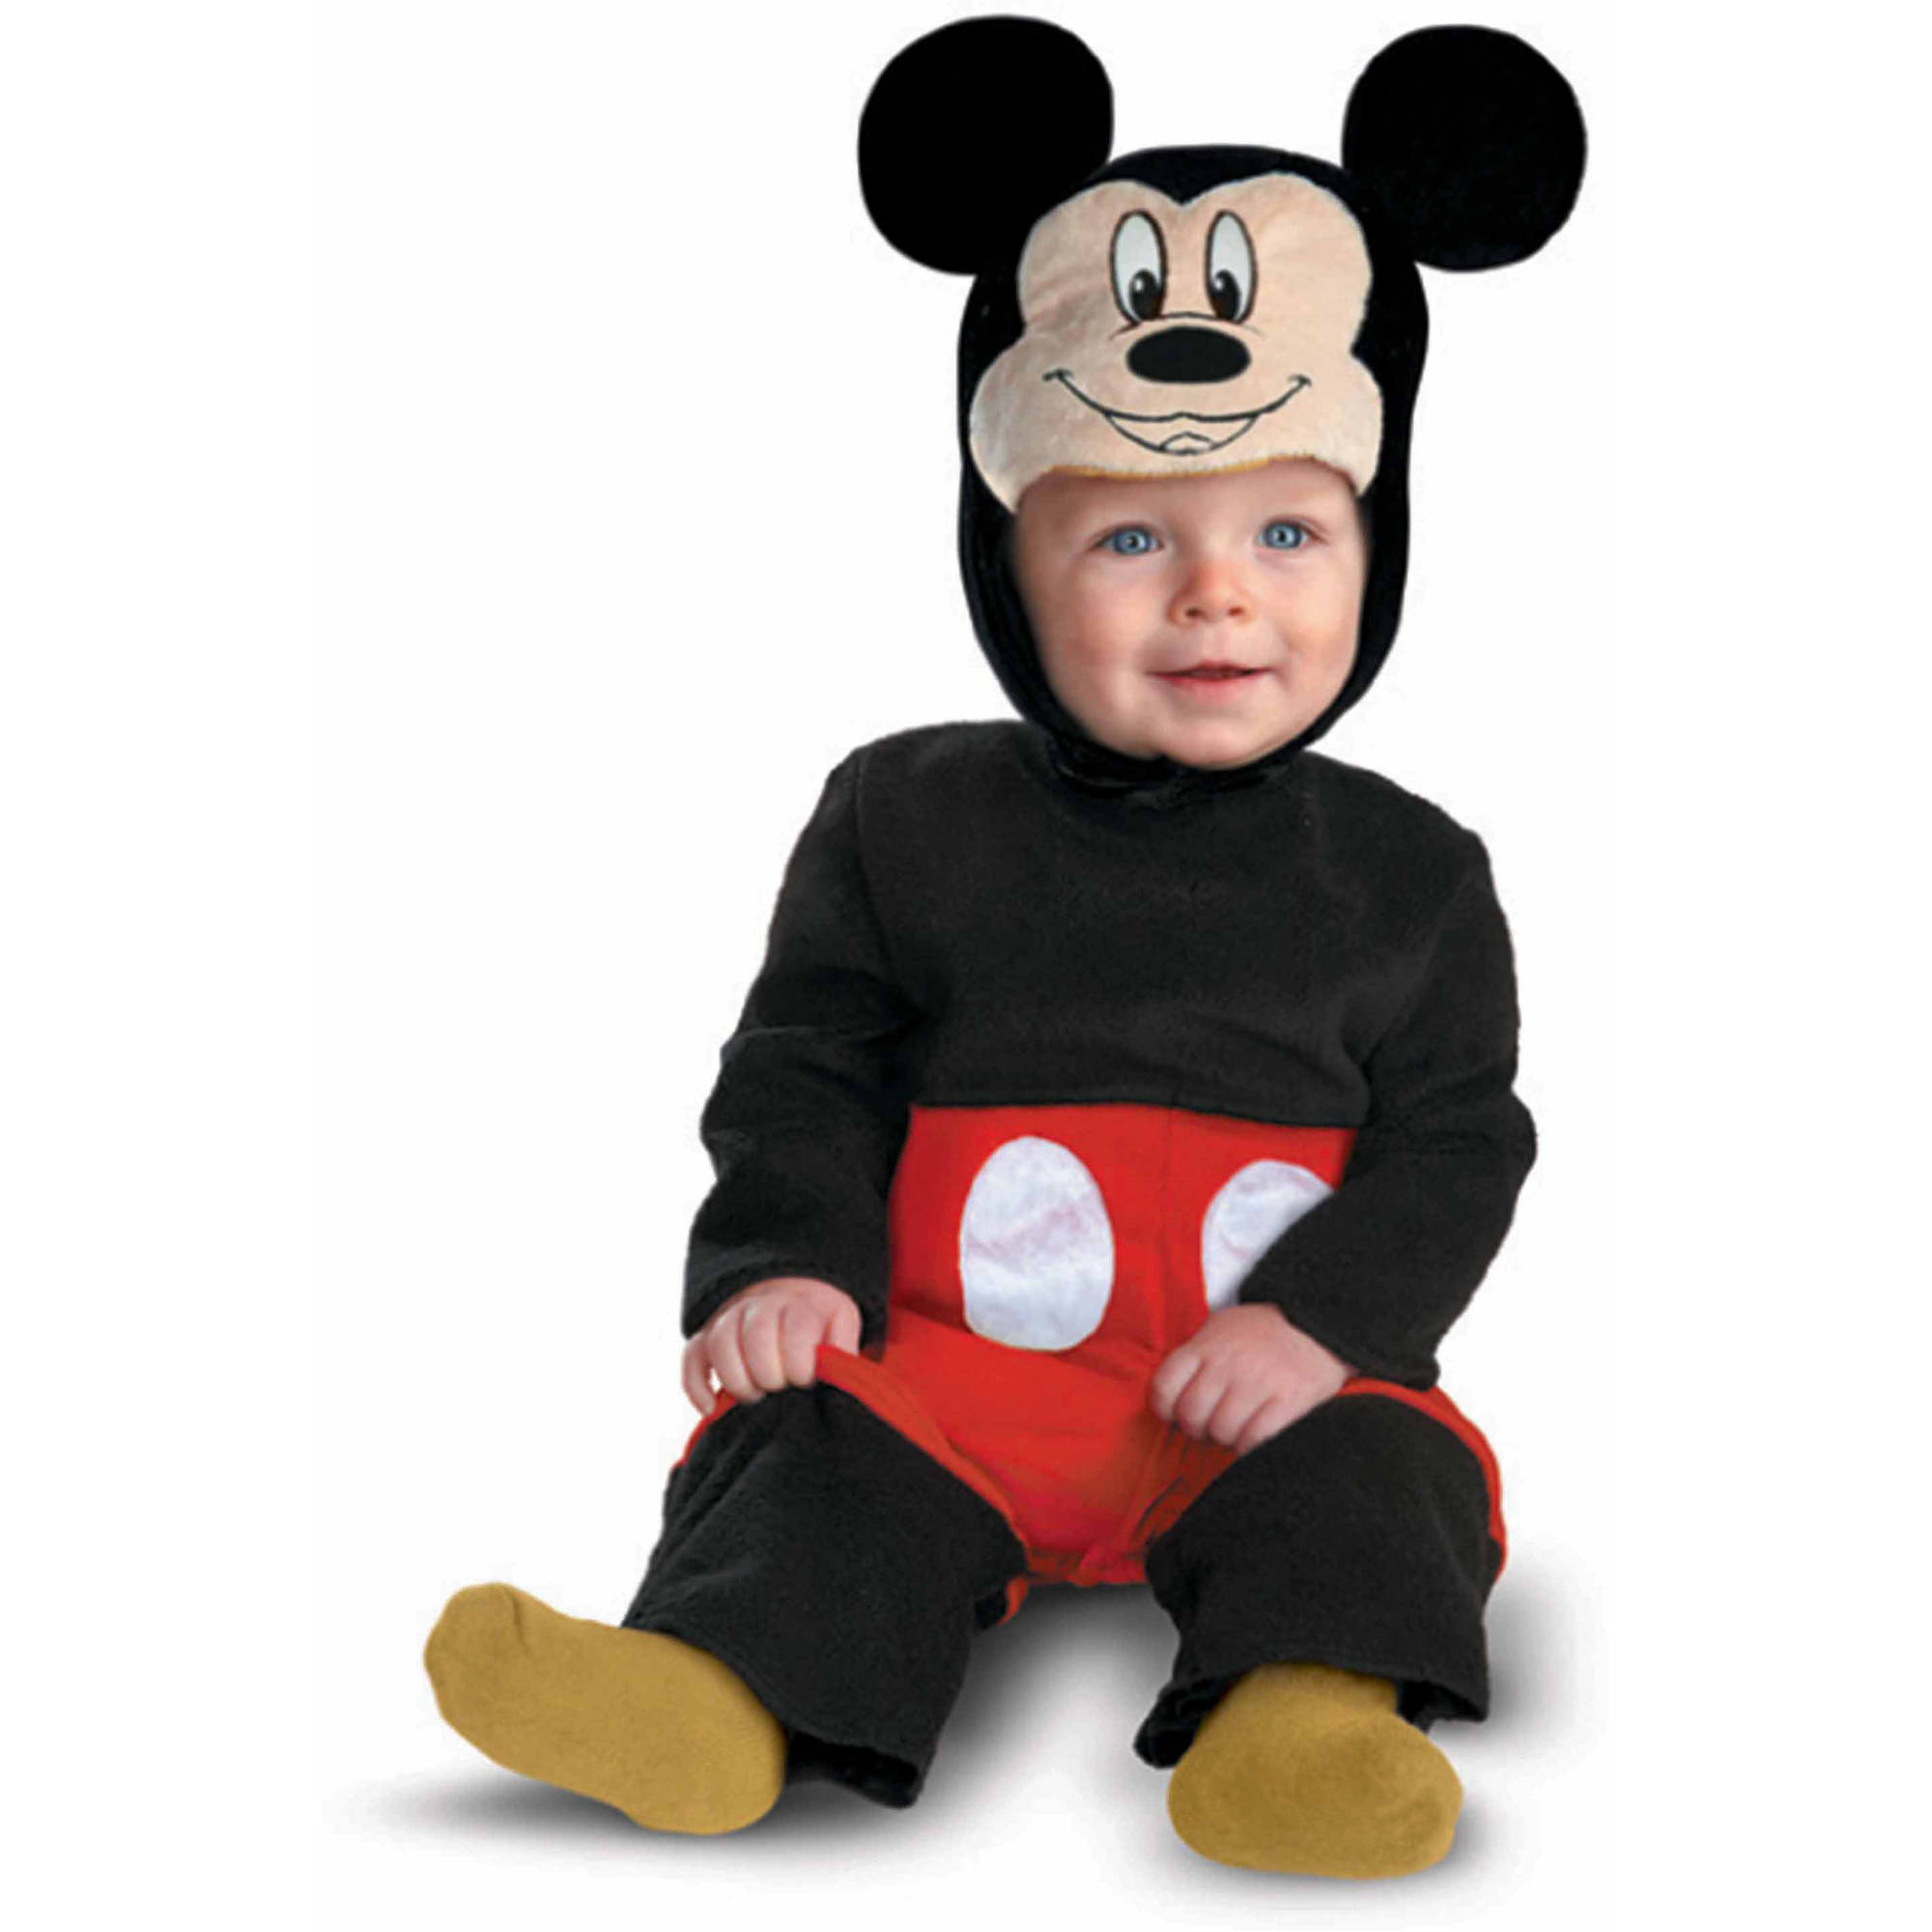 Disguise Disney Mickey Mouse Deluxe Infant Halloween Costume - image 1 of 2